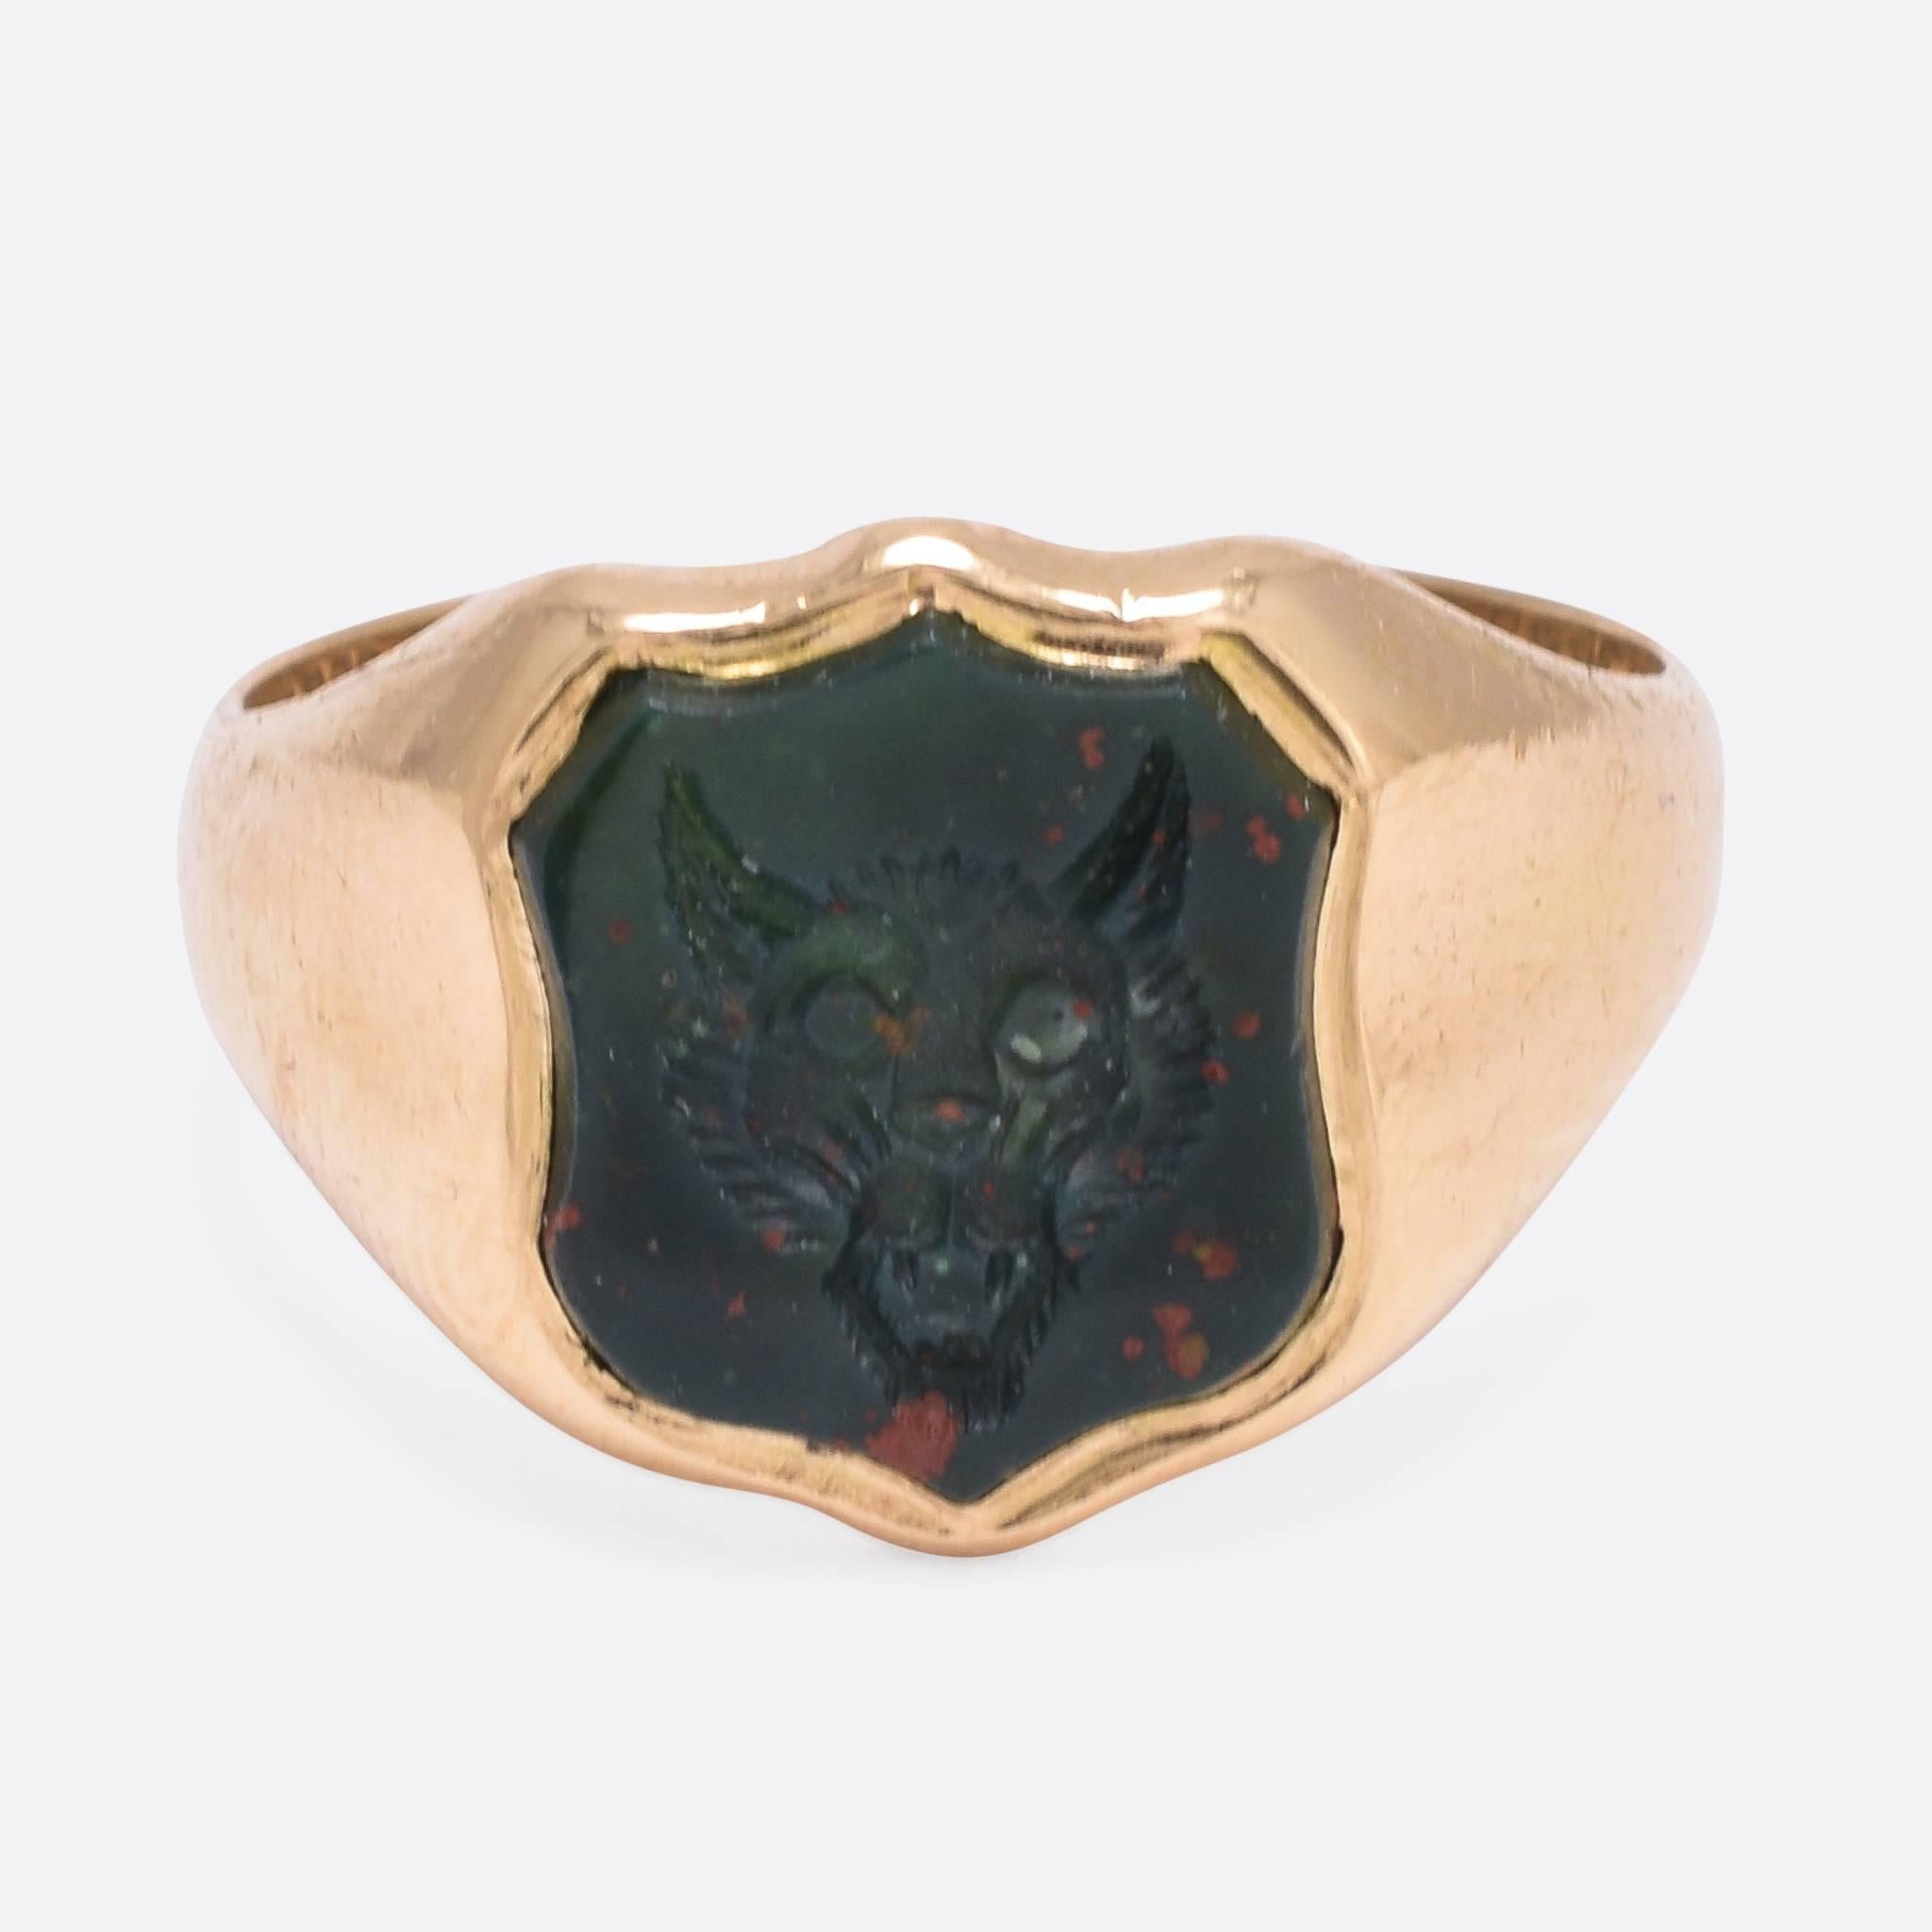 This cool antique Signet Ring is set with a shield-shaped bloodstone panel, carved with an English heraldic crest. Depicted is the face of a wolf - a crest that was adopted by the Sharpe family. It's modelled in 18ct gold, with Birmingham hallmarks